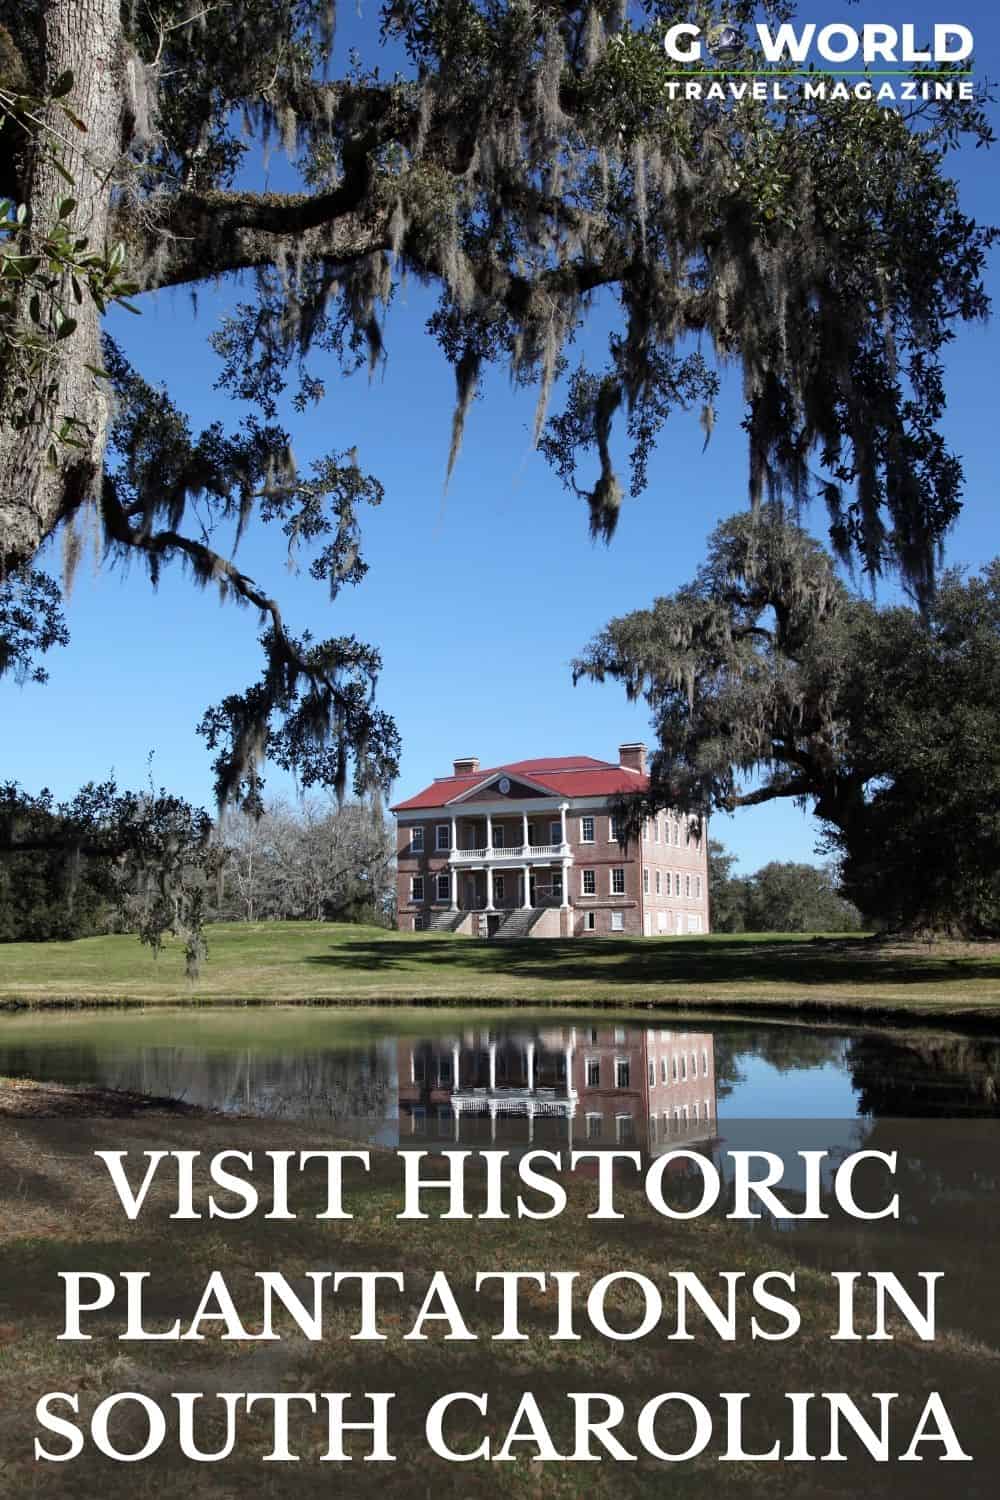 South Carolina plantations offer a glimpse into the Lowcountry's past, both historic and troubling. Learn about 2 beautiful plantations in SC. #southcarolina #southernplantations #charlestonplantations